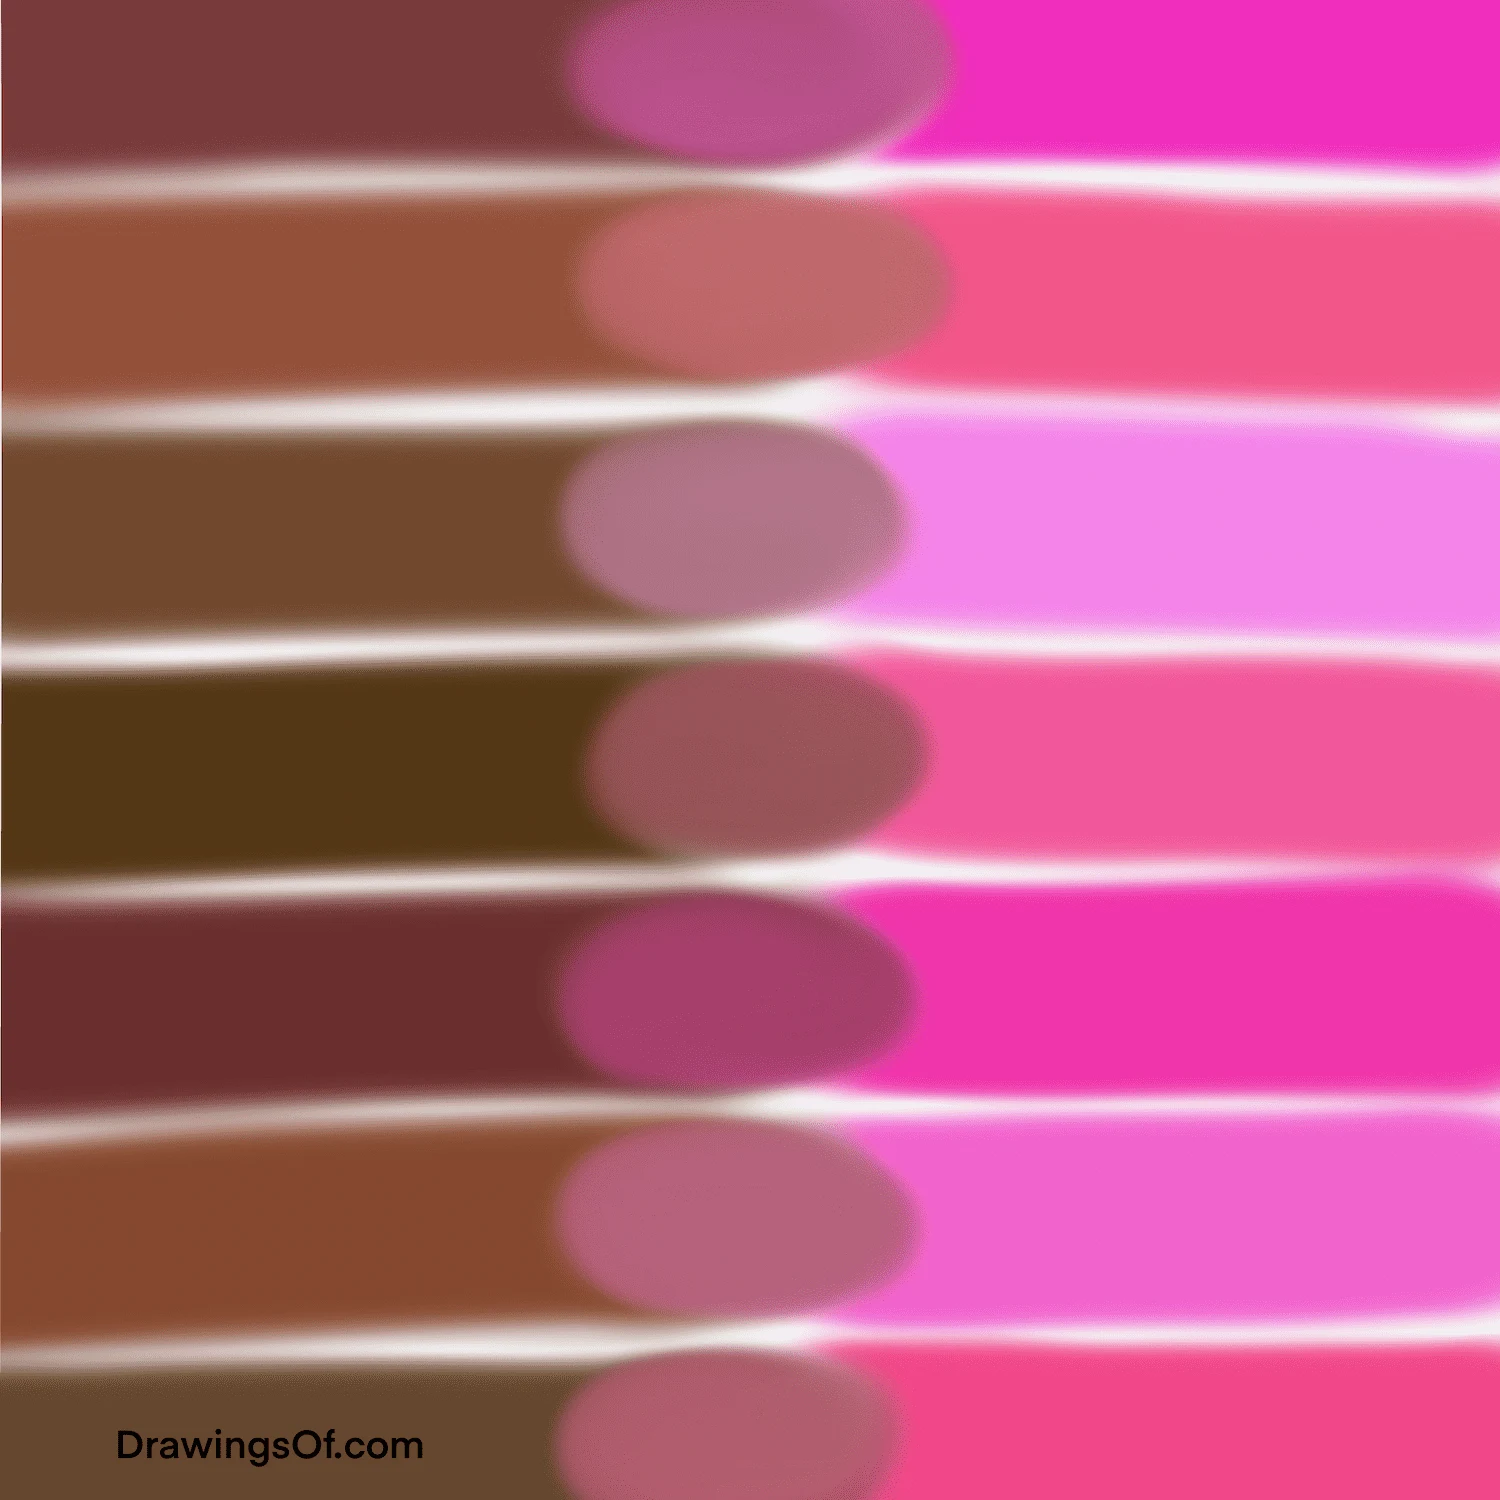 Dusty magenta, mauve, and dark pink, from mixing pink and brown.